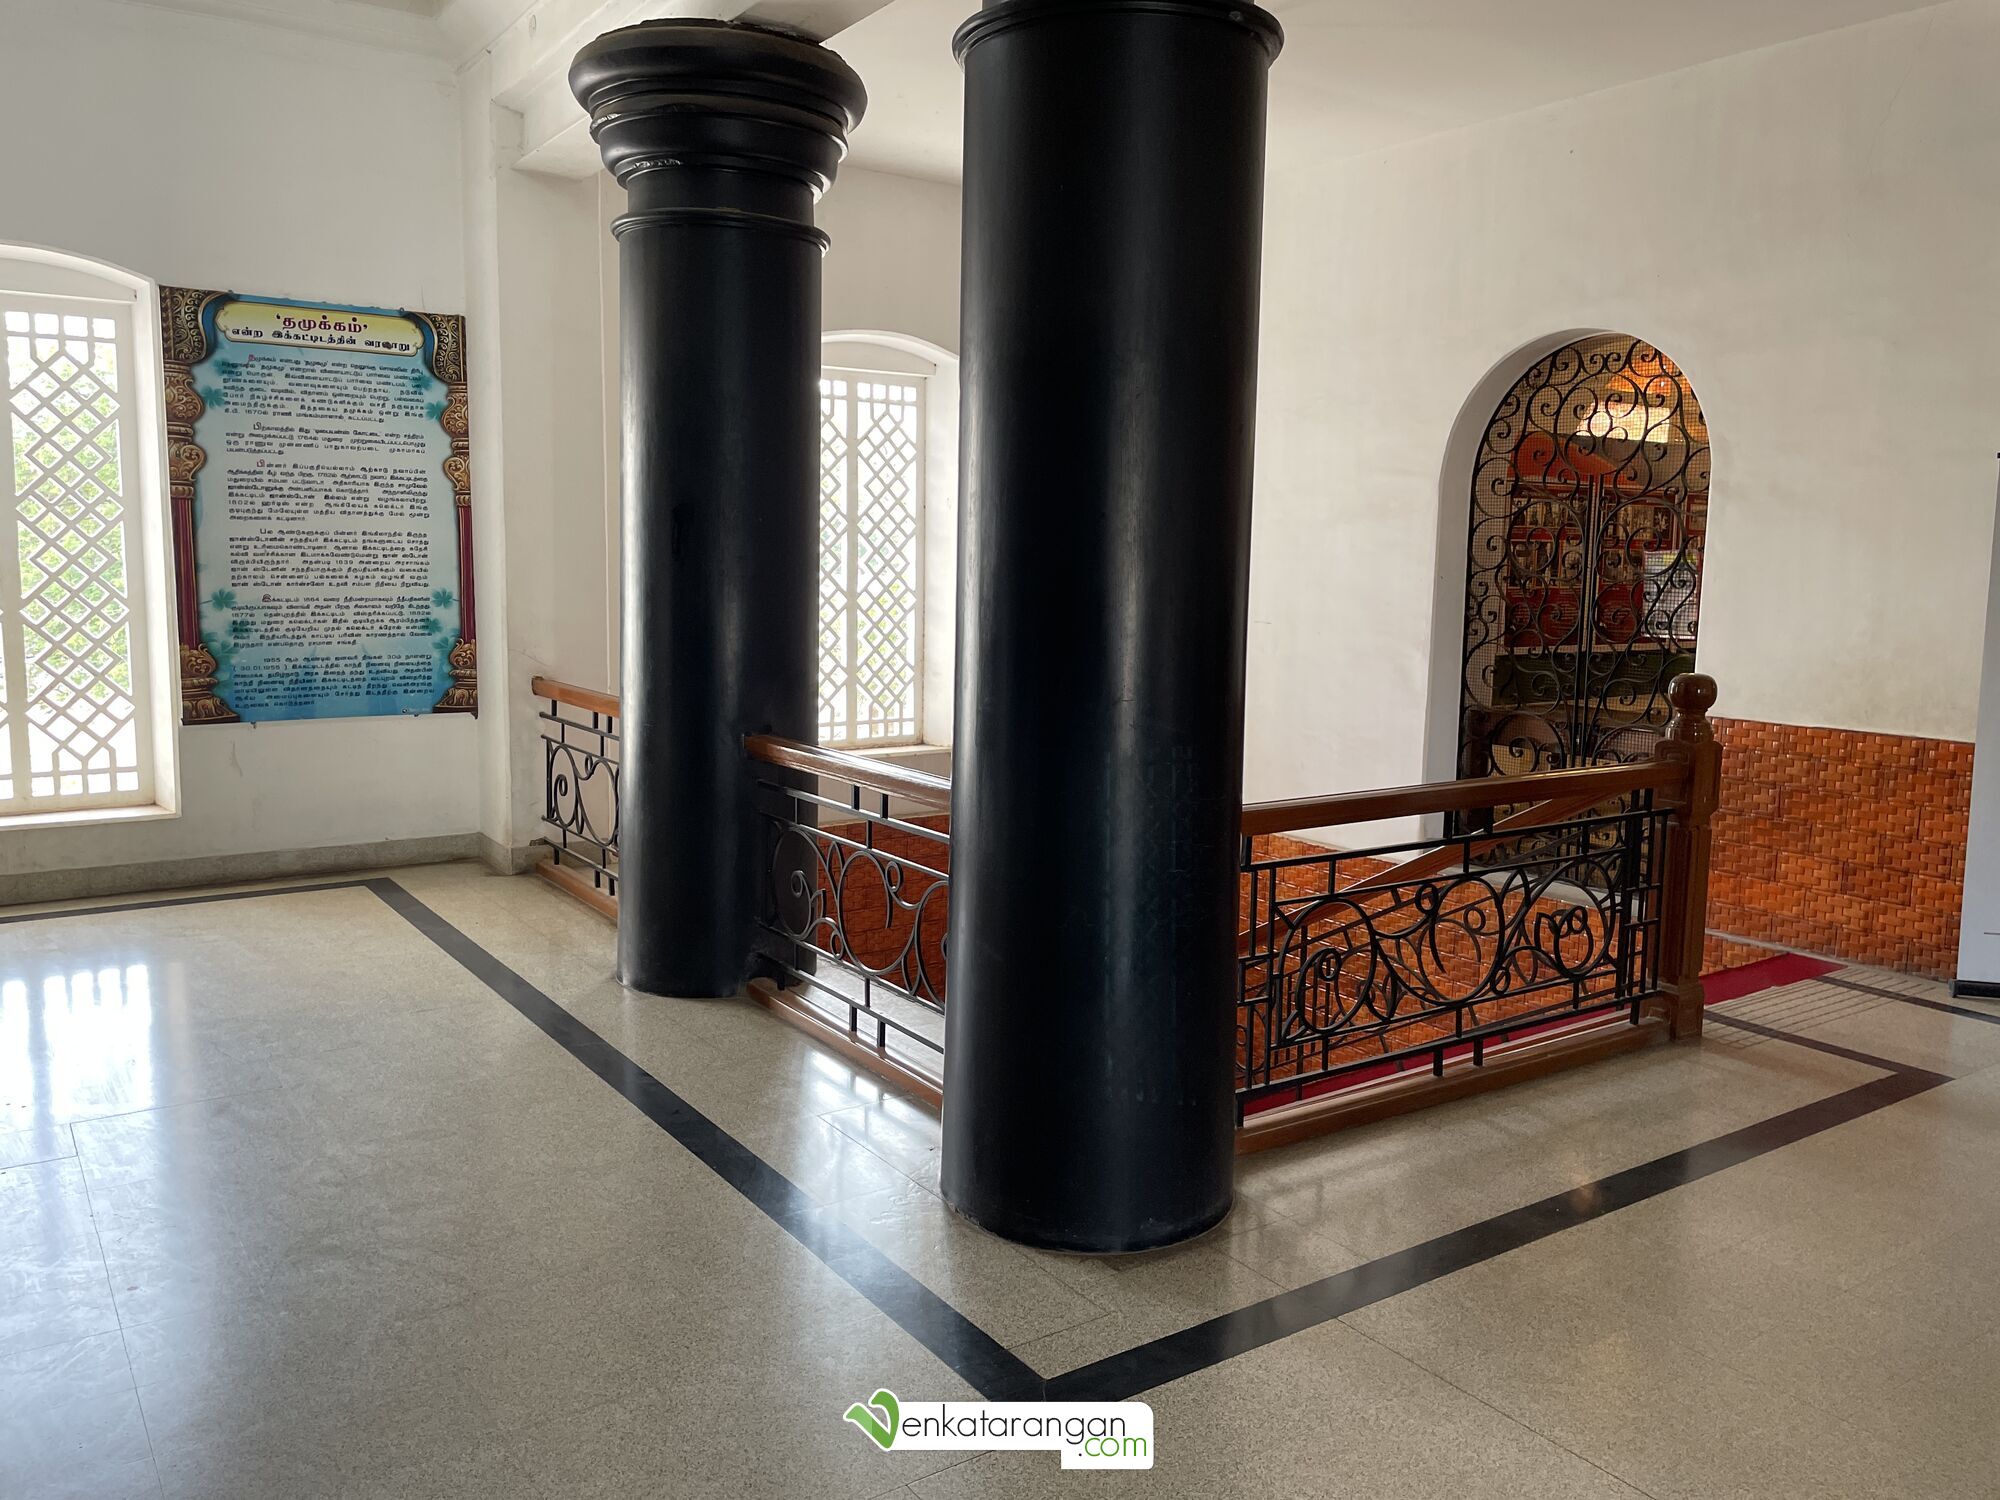 Look at the large cylindrical black columns, fascinating 